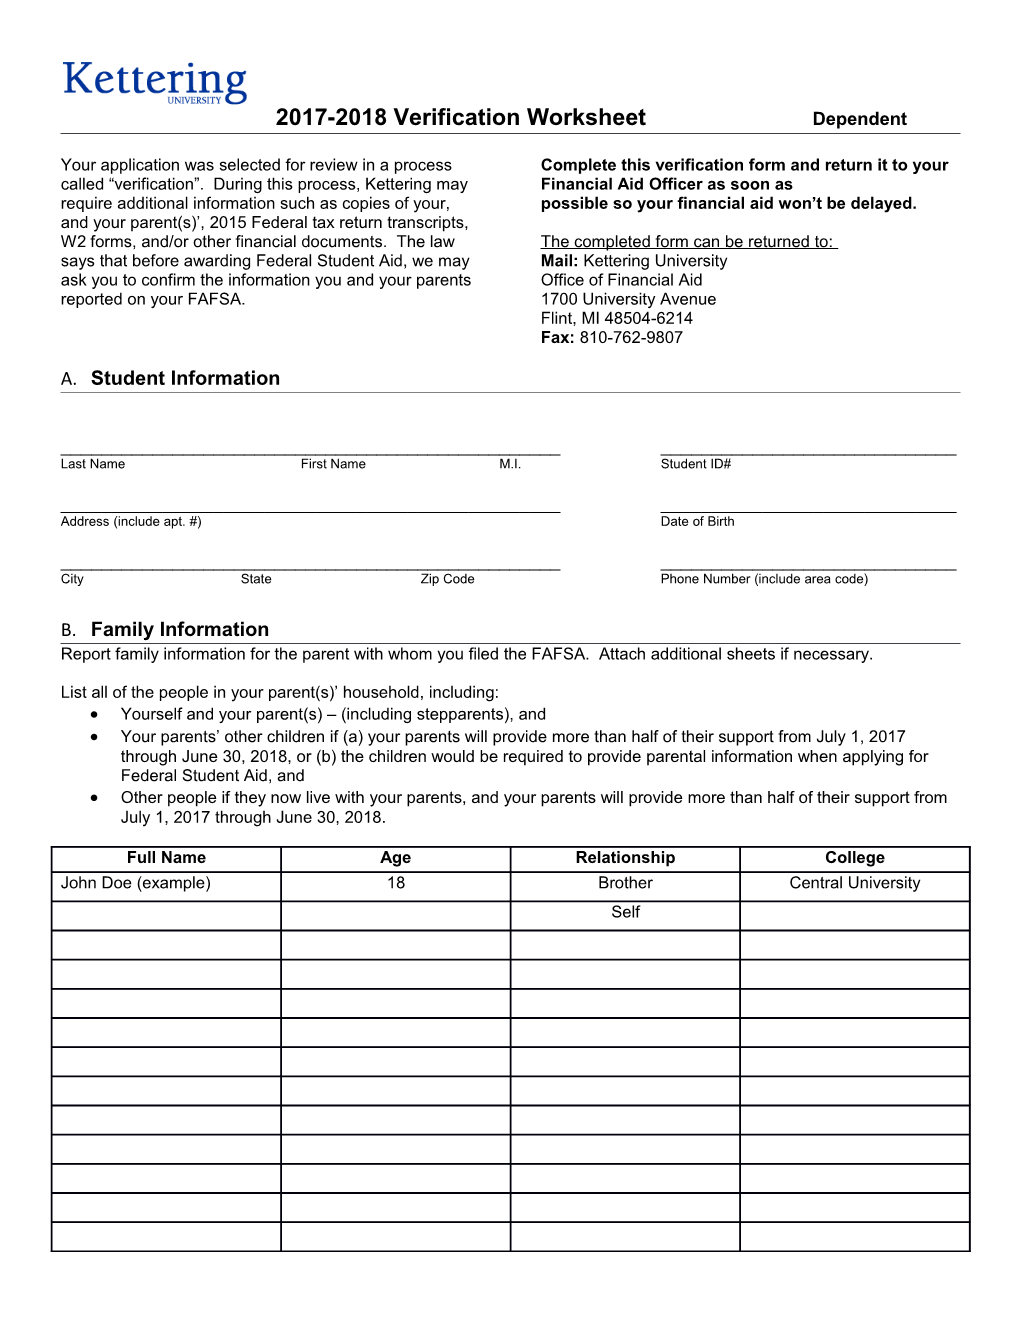 Complete This Verification Form and Return It to Your Financial Aid Officer As Soon As